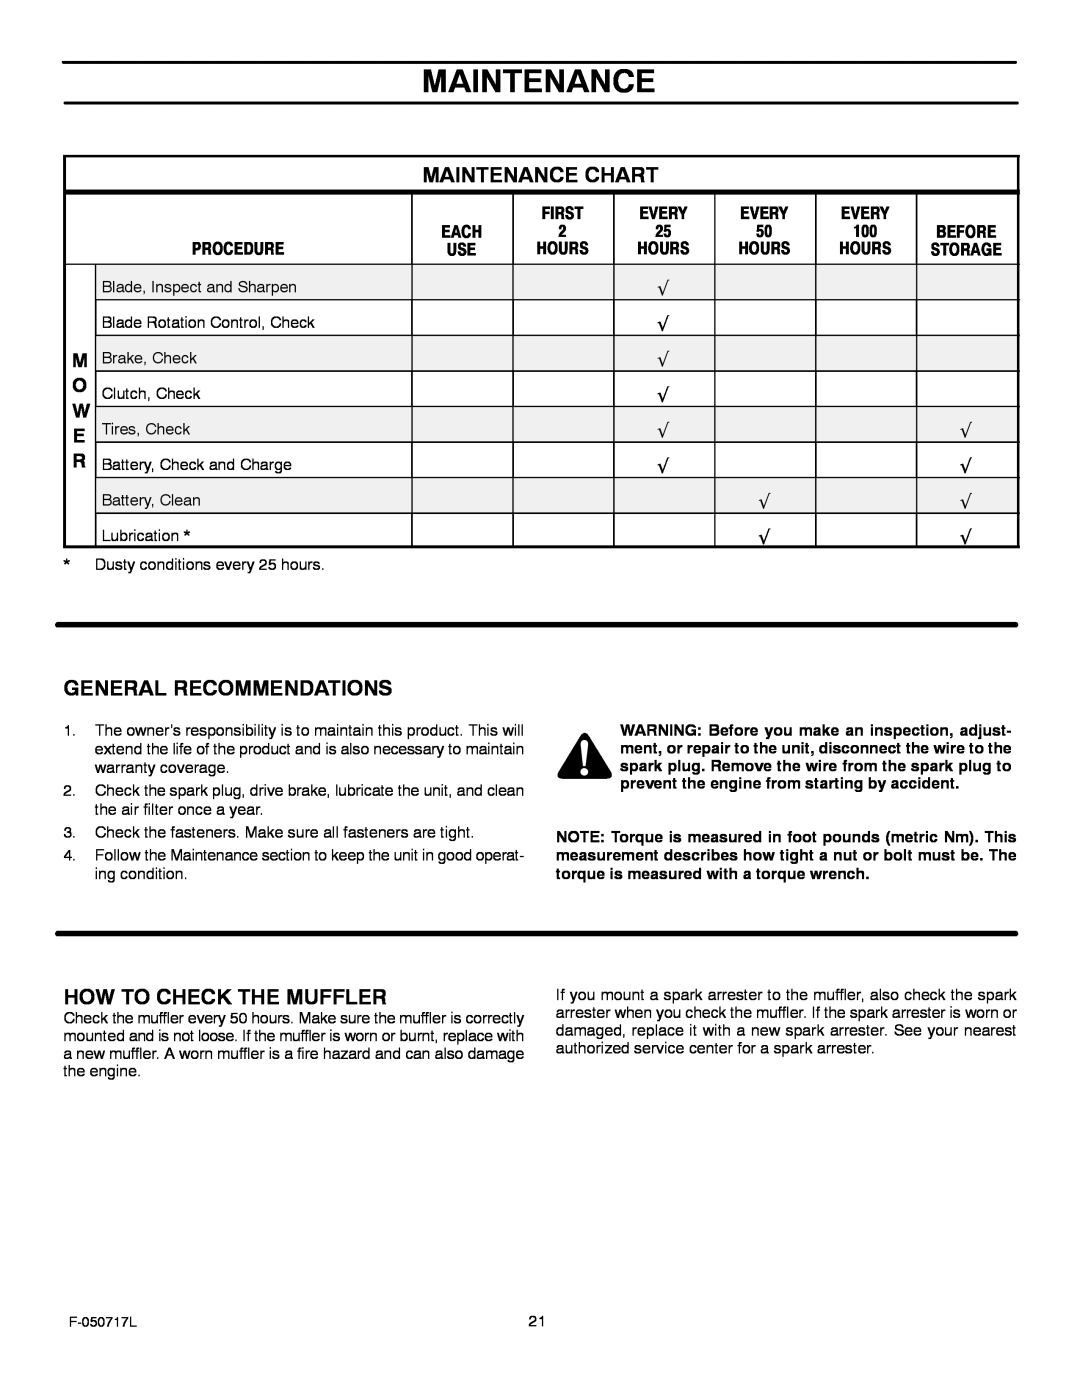 Murray 387002x92D manual Maintenance Chart, General Recommendations, How To Check The Muffler 